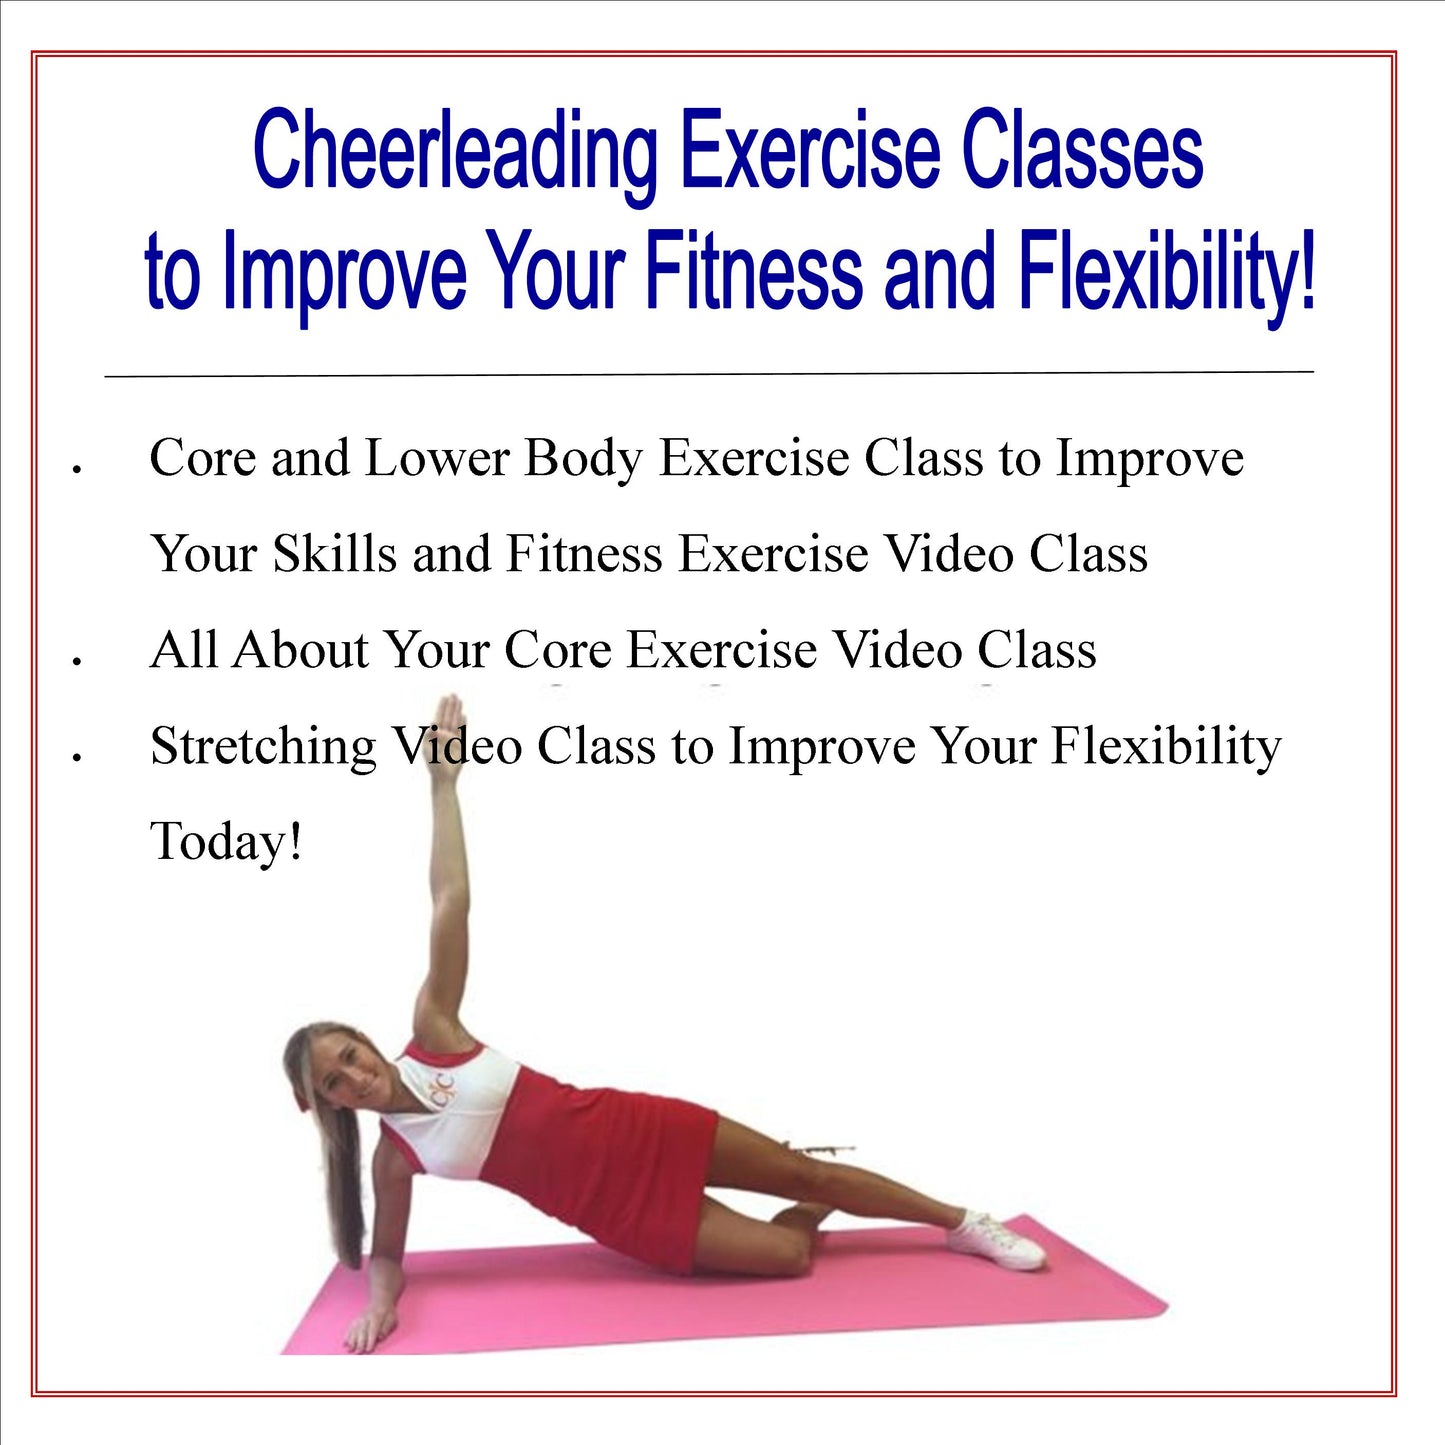 Exercises Classes to Improve Your Fitness and Your Flexibility - Video Classes - Cheer and Dance On Demand